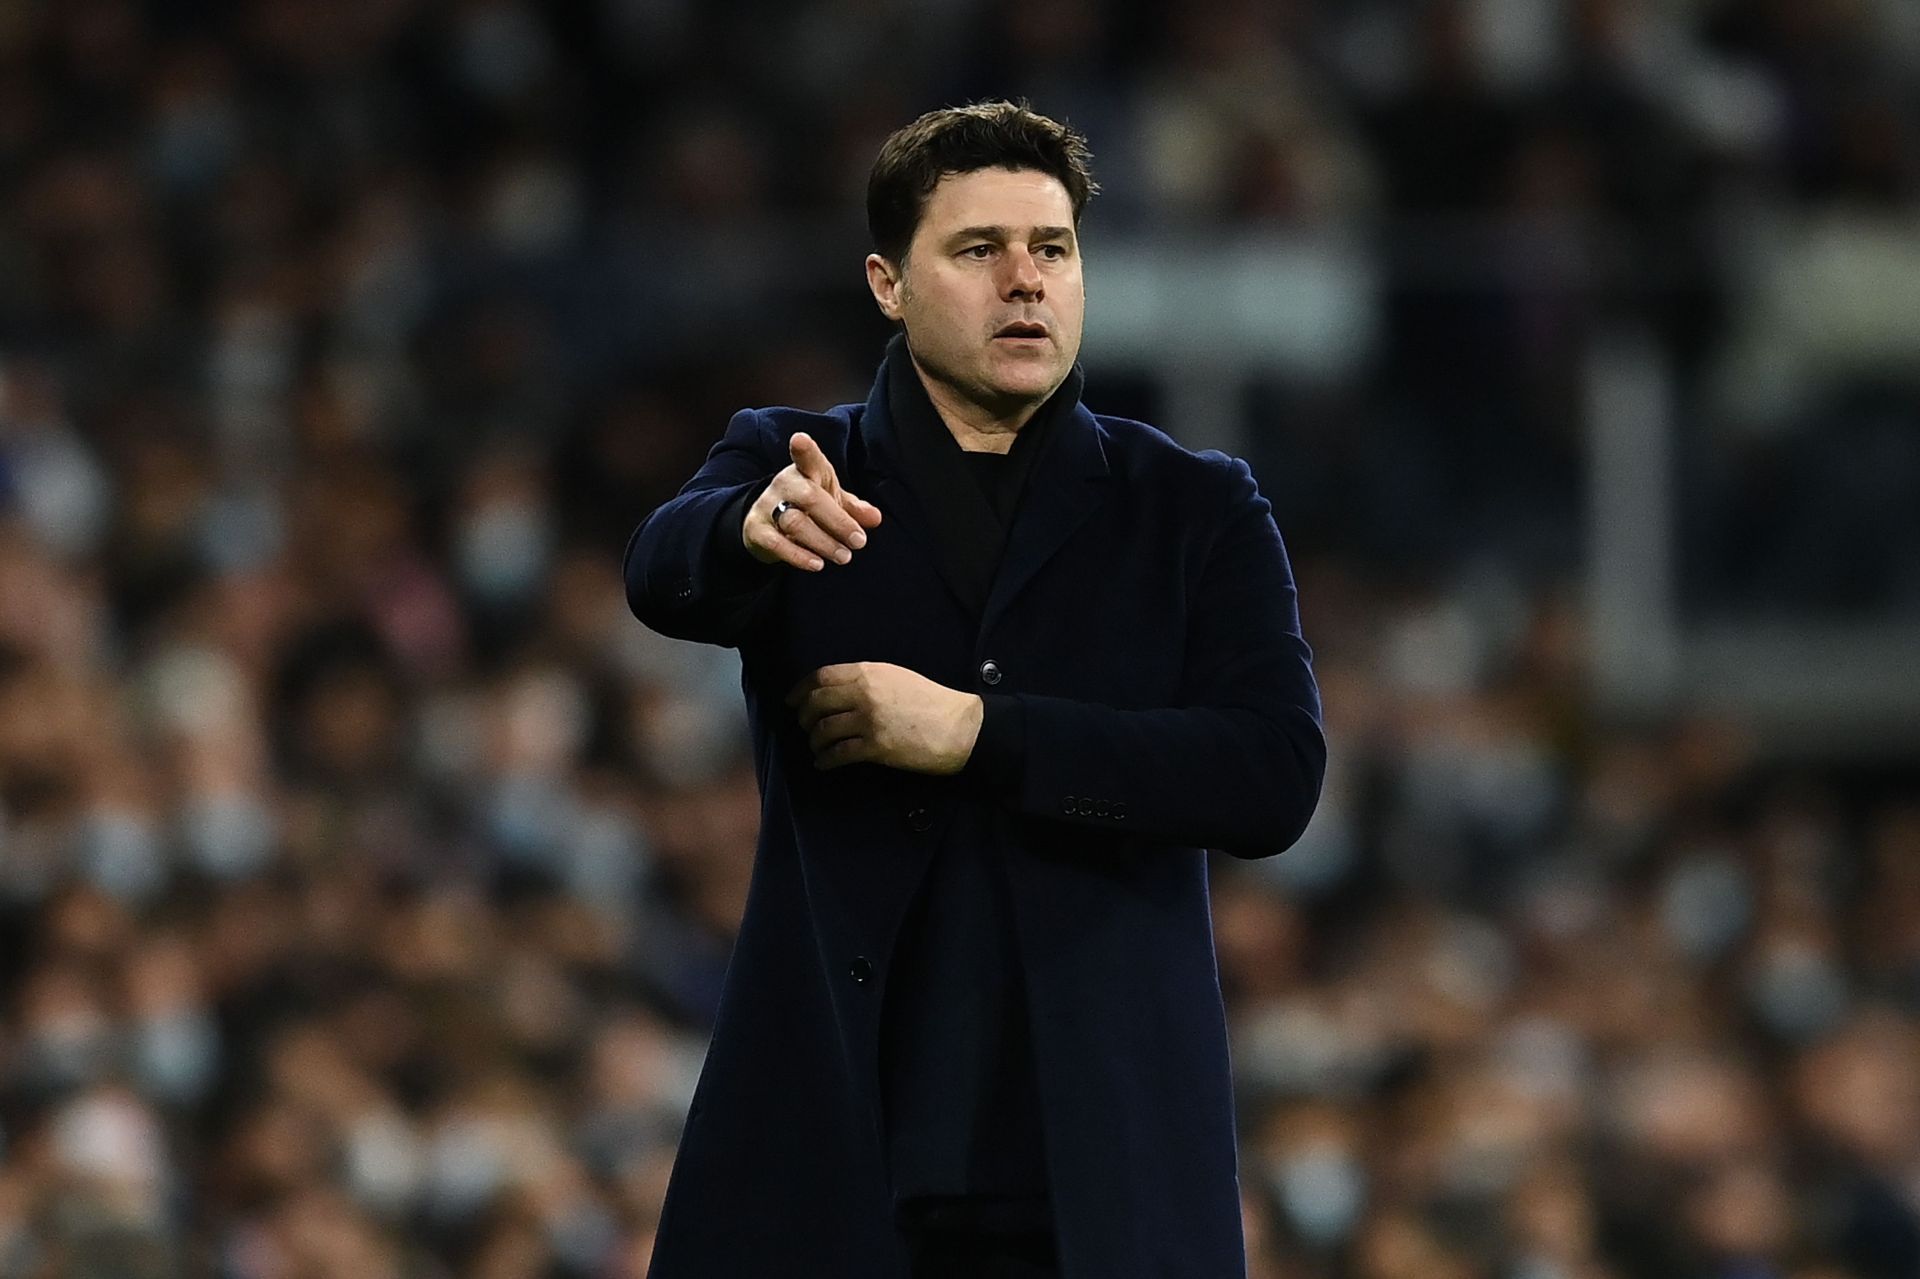 Pochettino lasted only 18 months at Parc de Prince